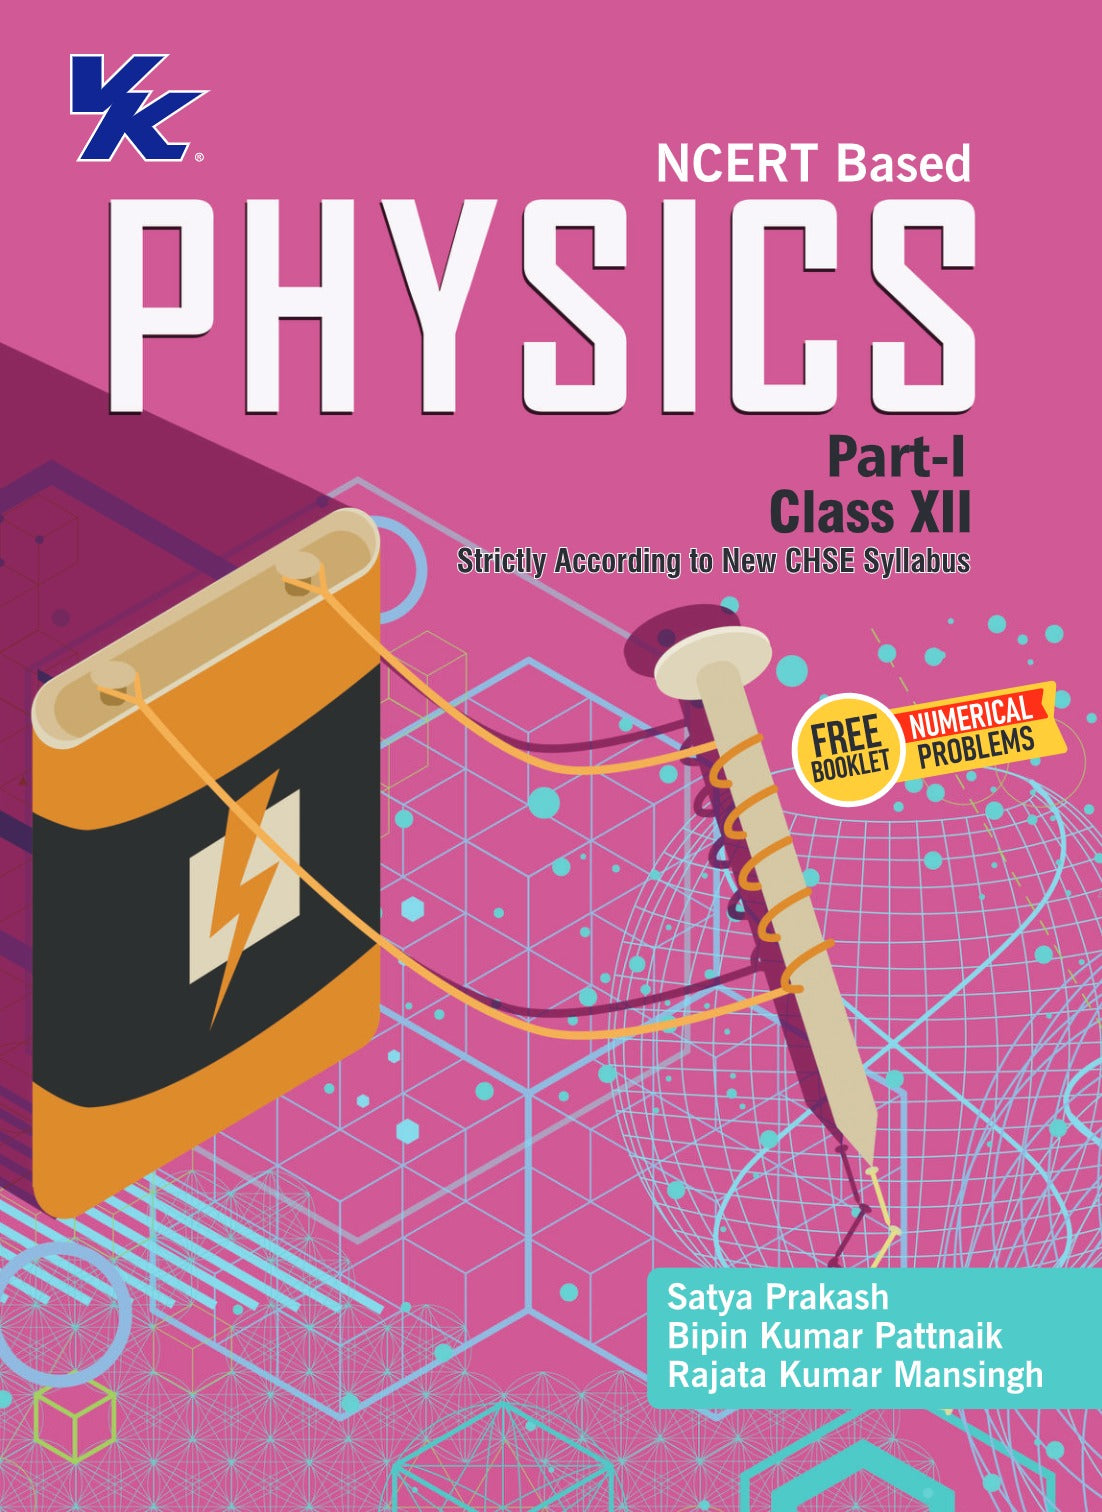 Physics Part I & II Textbooks (Set of 3) & Free Numerical Problems book for Class 12 CHSE Board 2024-25 Examinations